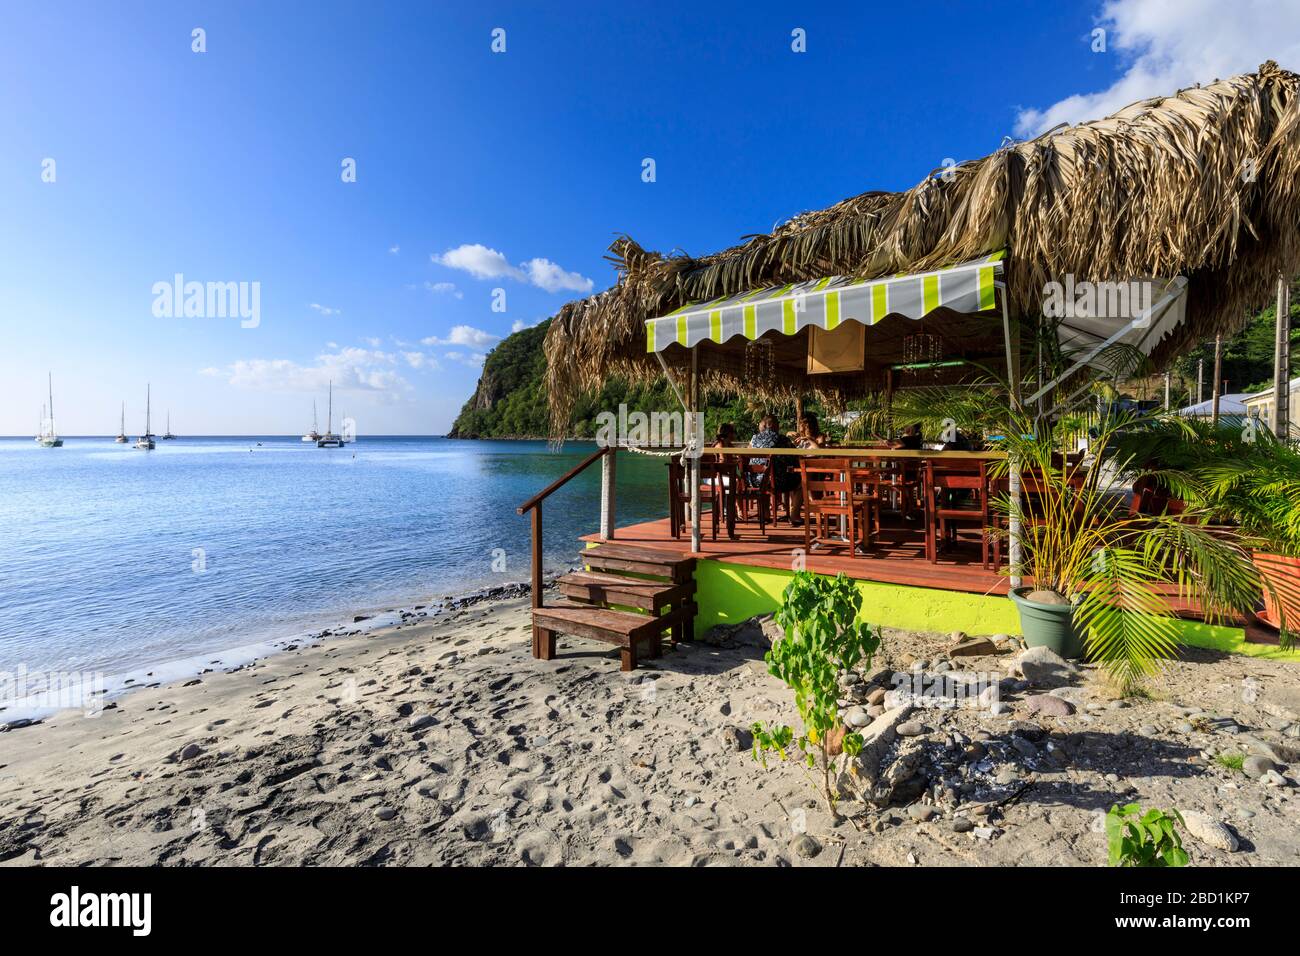 Deshaies, Catherine's Bar, Death In Paradise location, late afternoon, Basse Terre, Guadeloupe, Leeward Islands, Caribbean Stock Photo